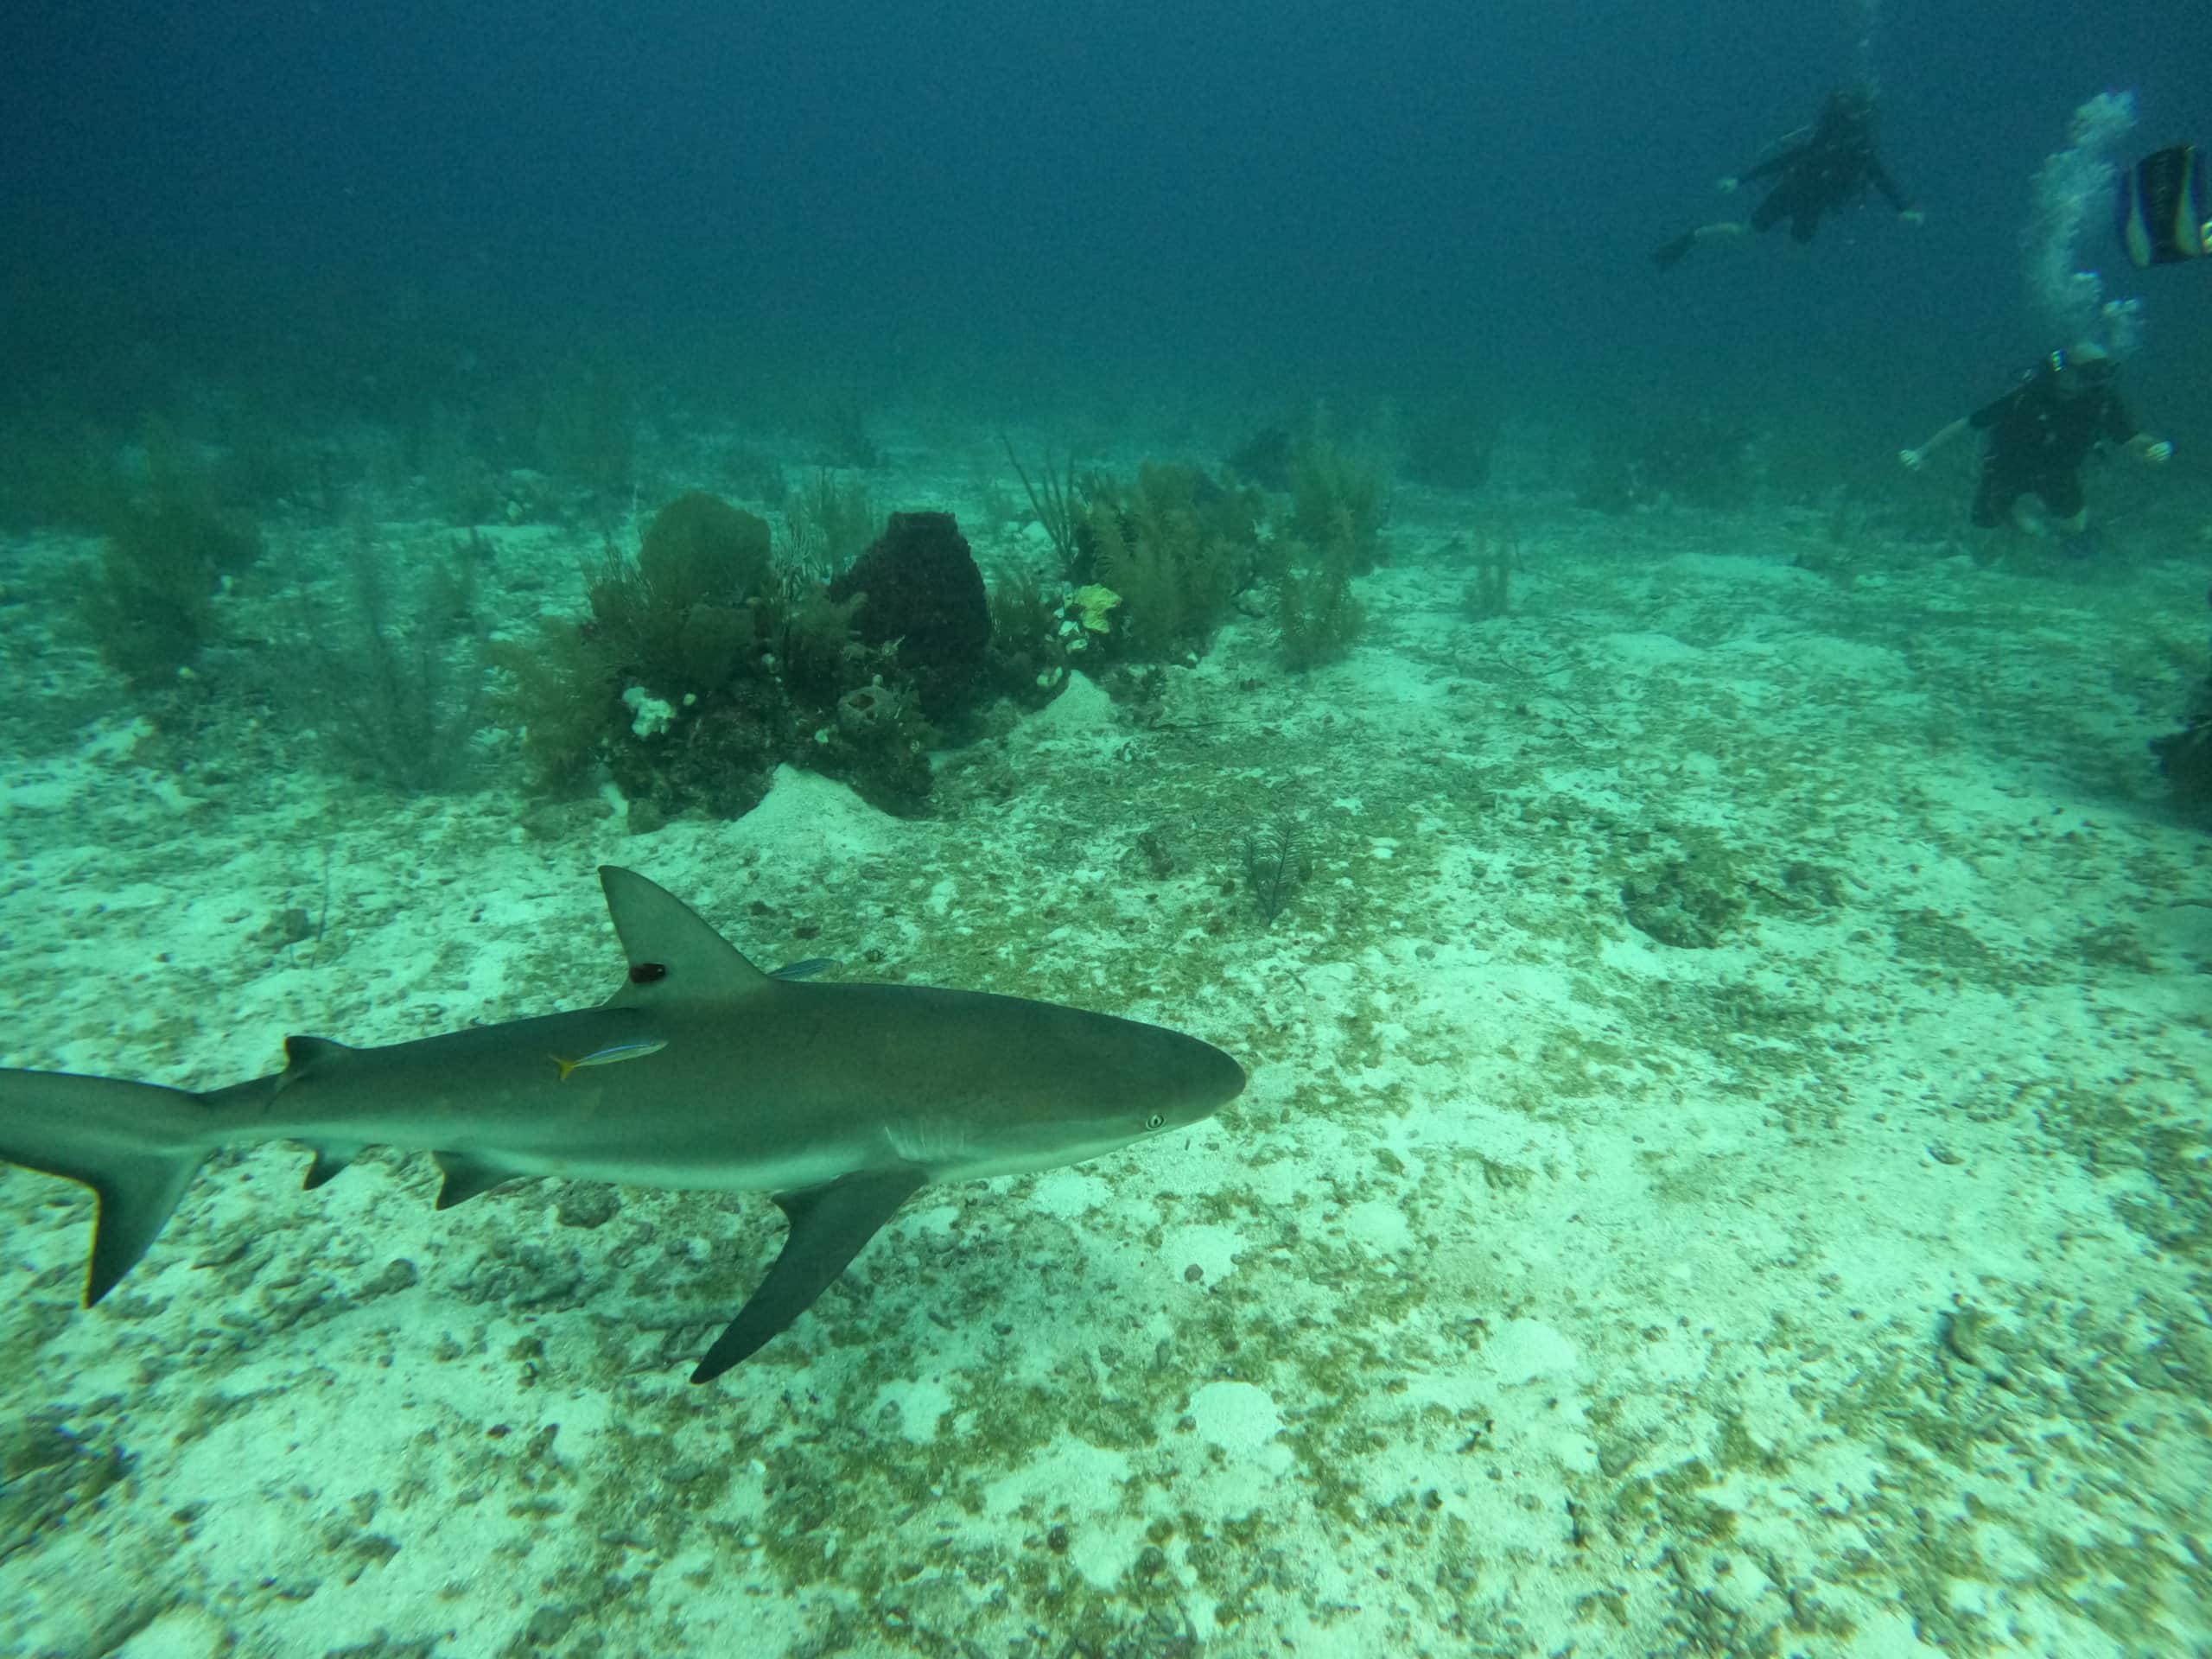 reef shark seen while scuba diving in belize.